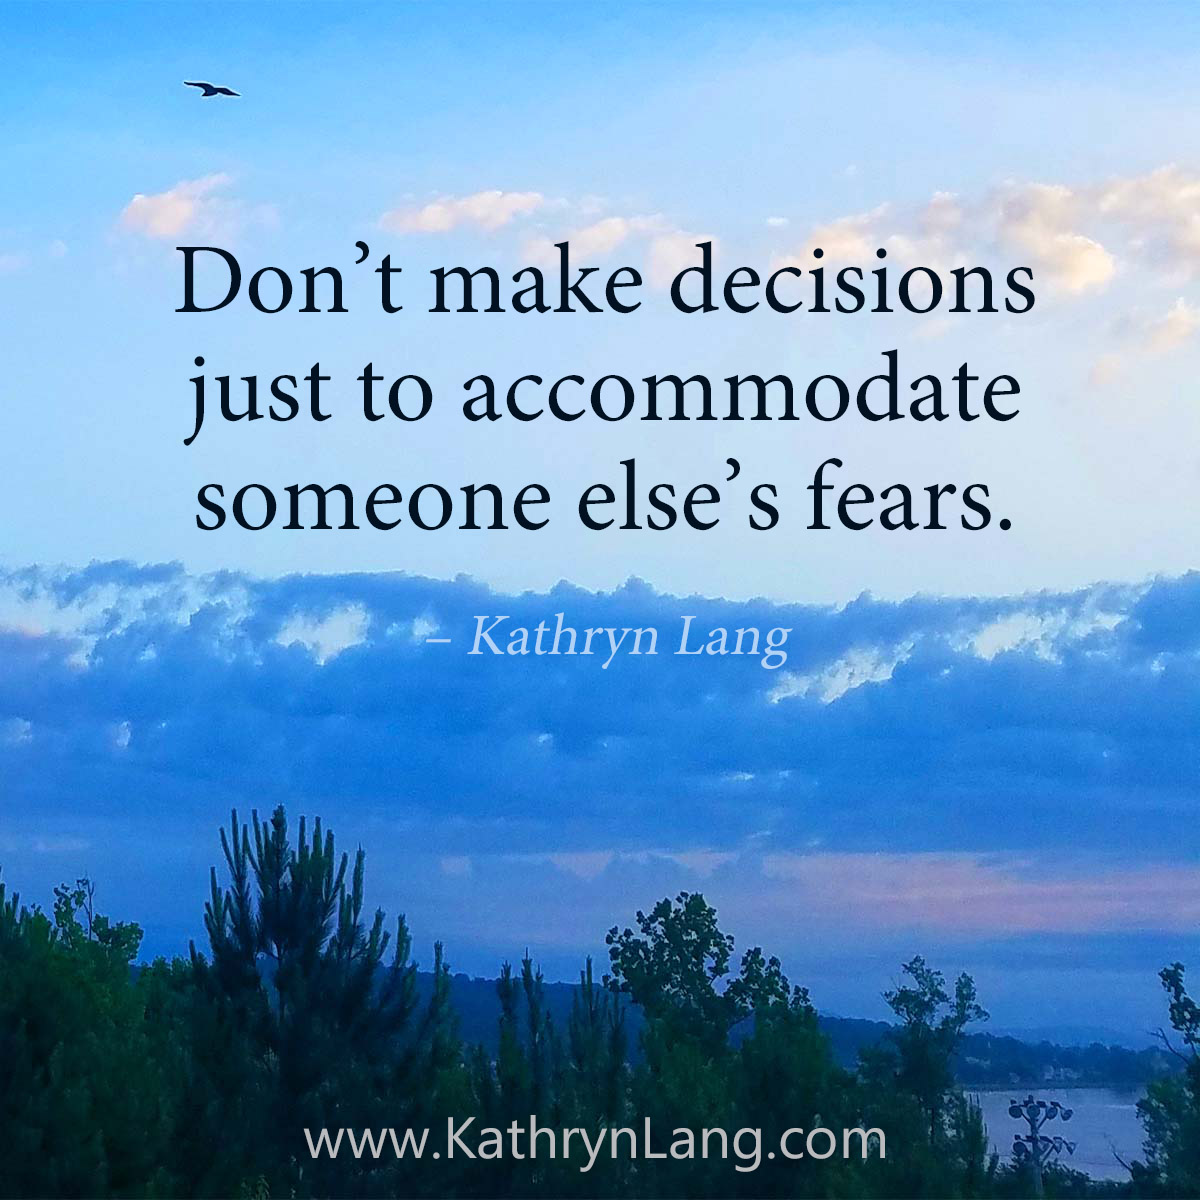 #QuoteoftheDay

Don’t make decisions 
just to accommodate 
someone else’s fears.
- Kathryn Lang